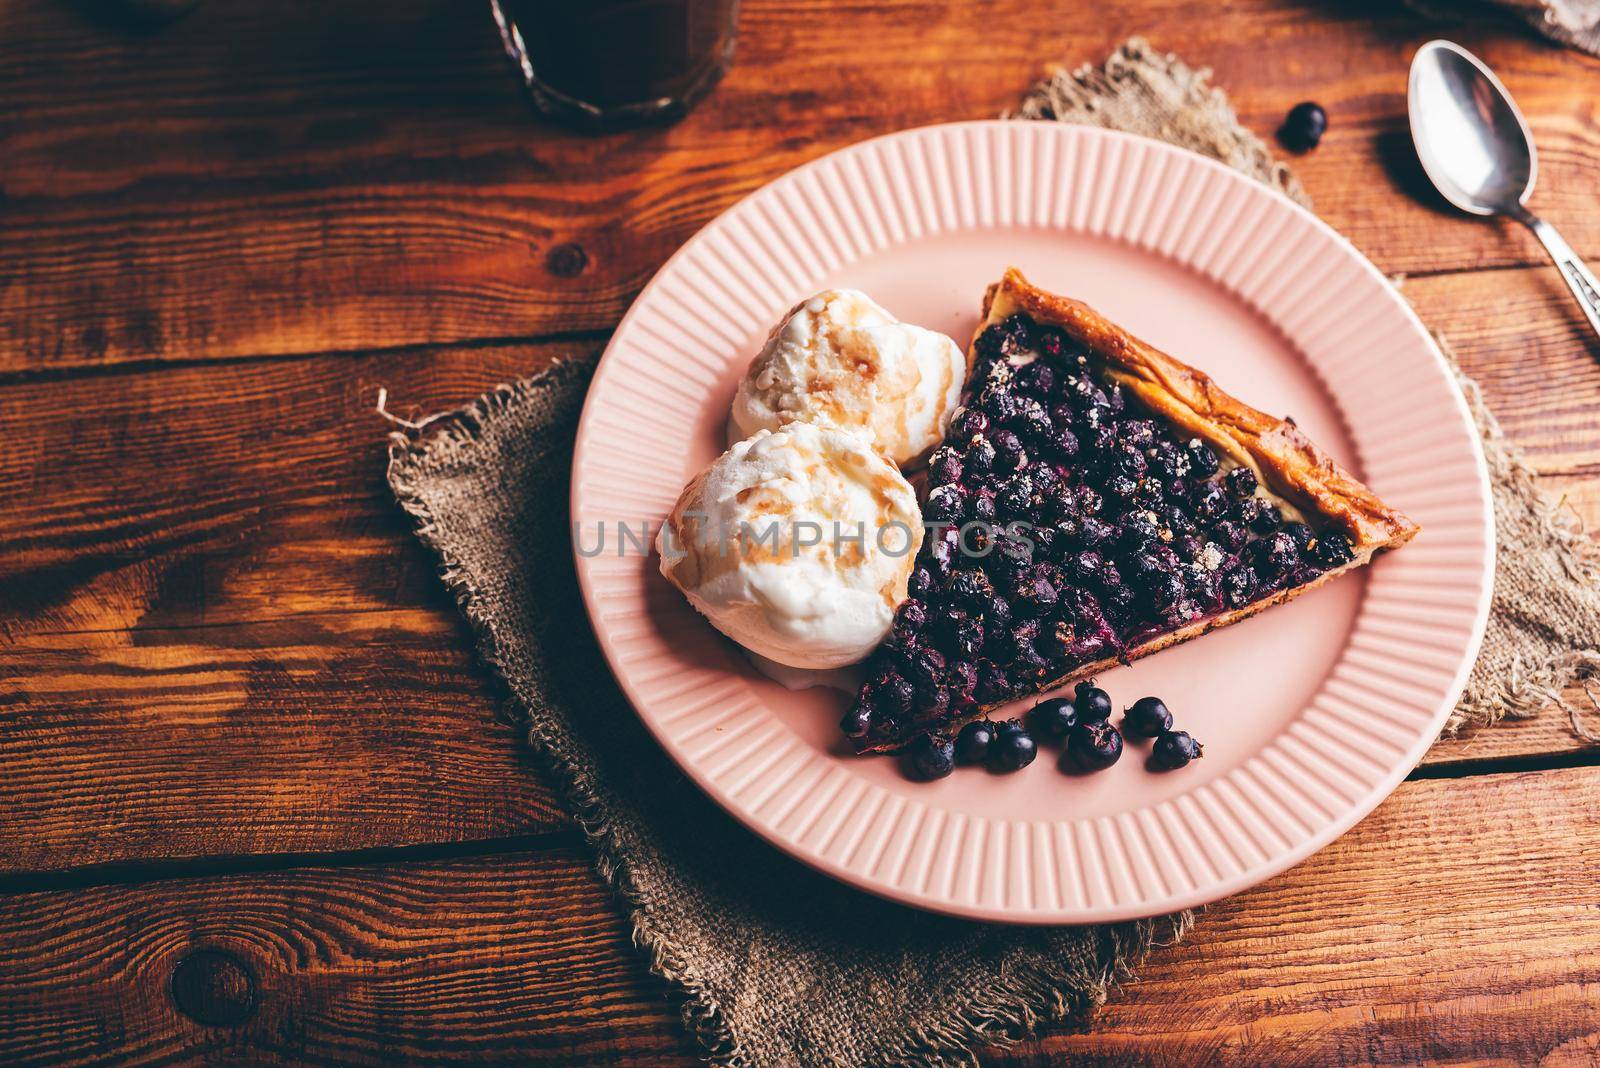 Slice of Homemade Serviceberry Pie and Two Scoops Of Vanilla Ice Cream on Plate over Wooden Table